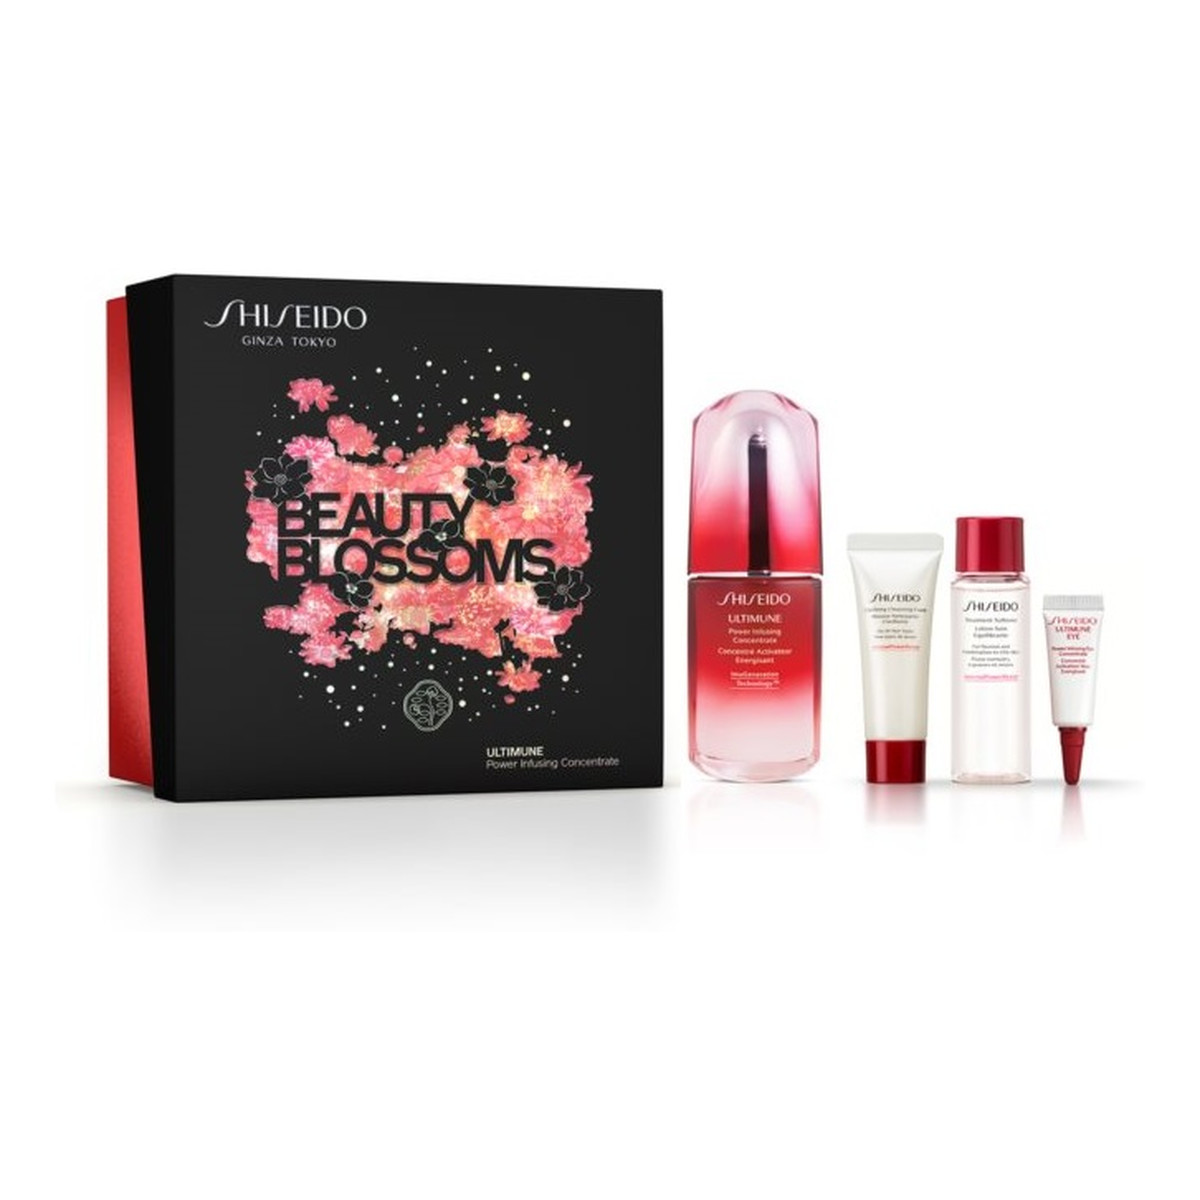 Shiseido Beauty Blossoms Zestaw ultimune power infusing concentrate 50ml + power infusing eye concentrate 3ml + treatment softener 30ml + clarifying cleansing foam 15ml